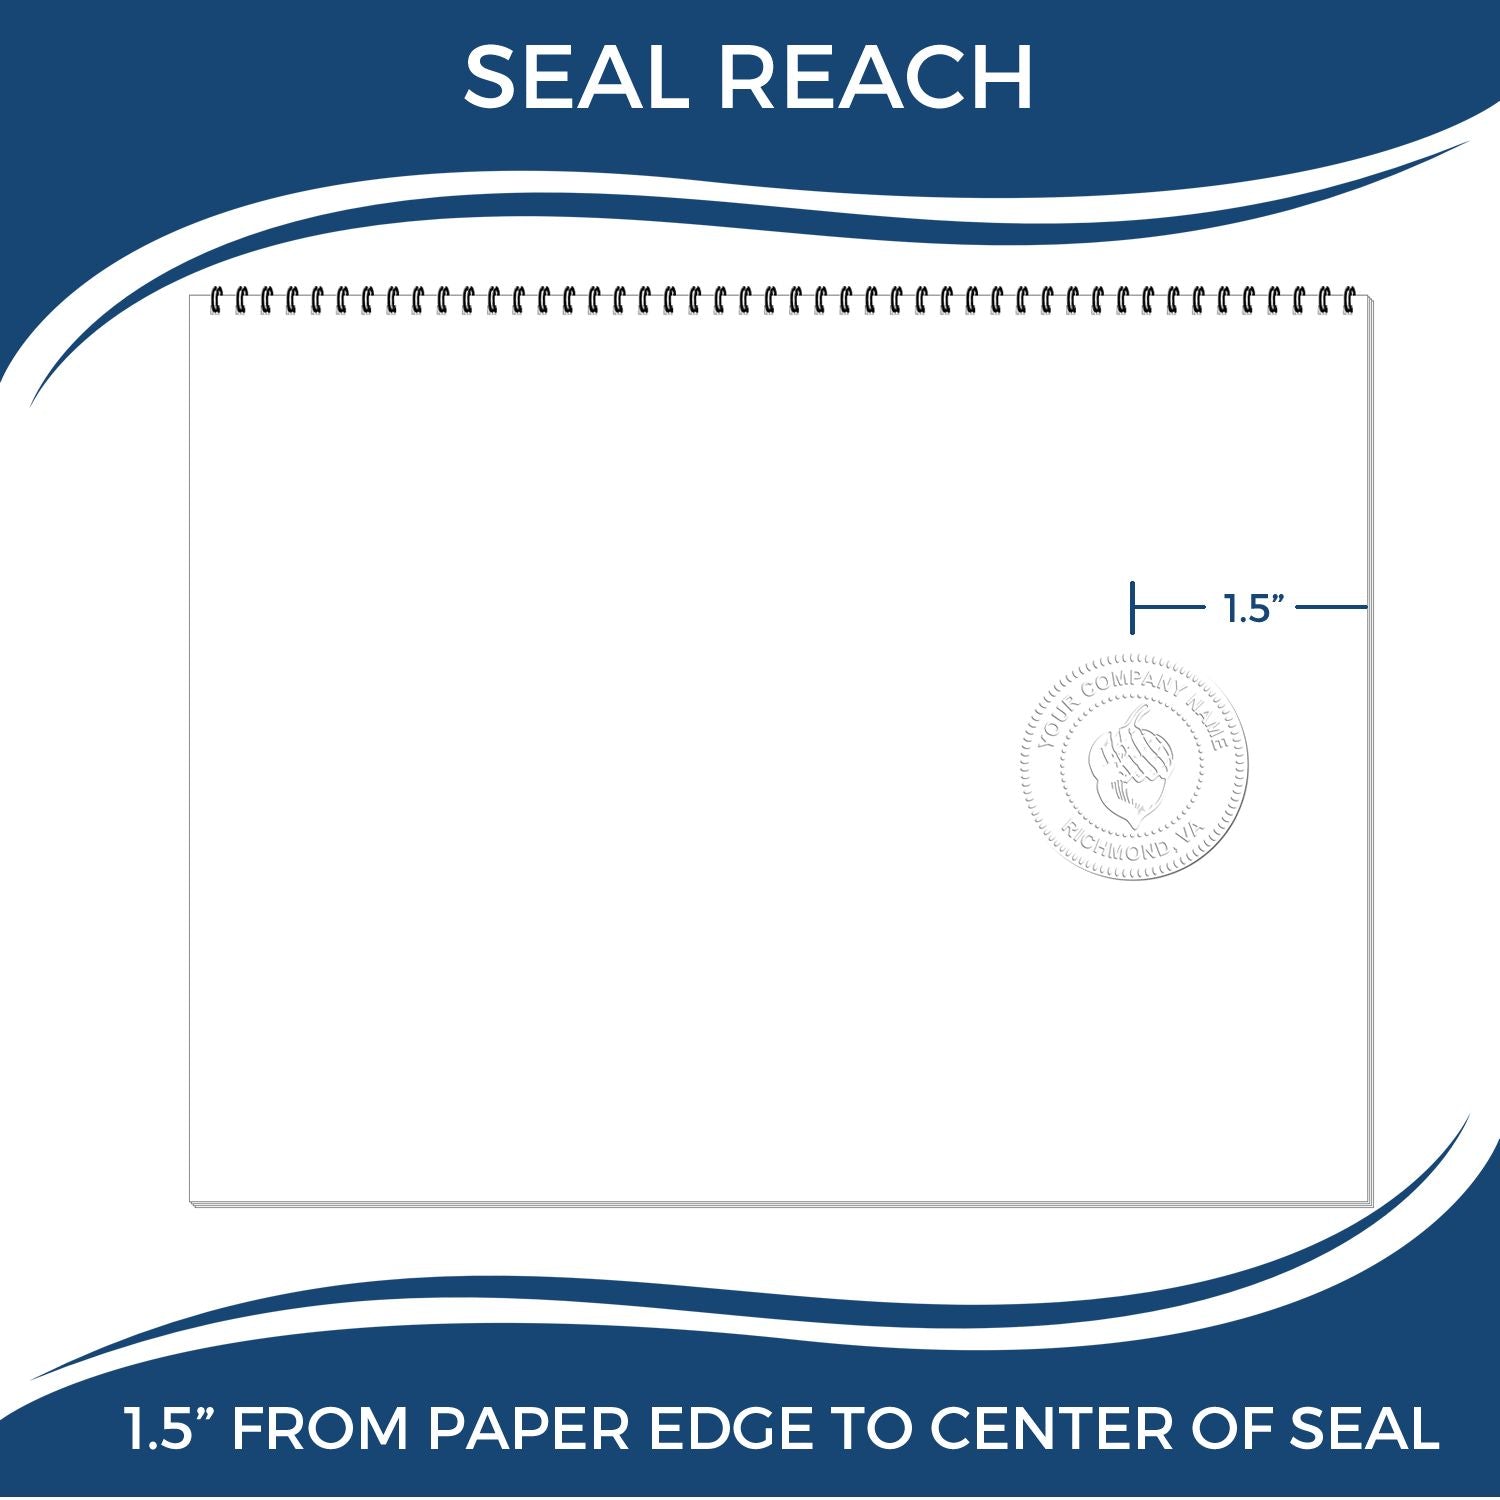 An infographic showing the seal reach which is represented by a ruler and a miniature seal image of the Hybrid Iowa Land Surveyor Seal